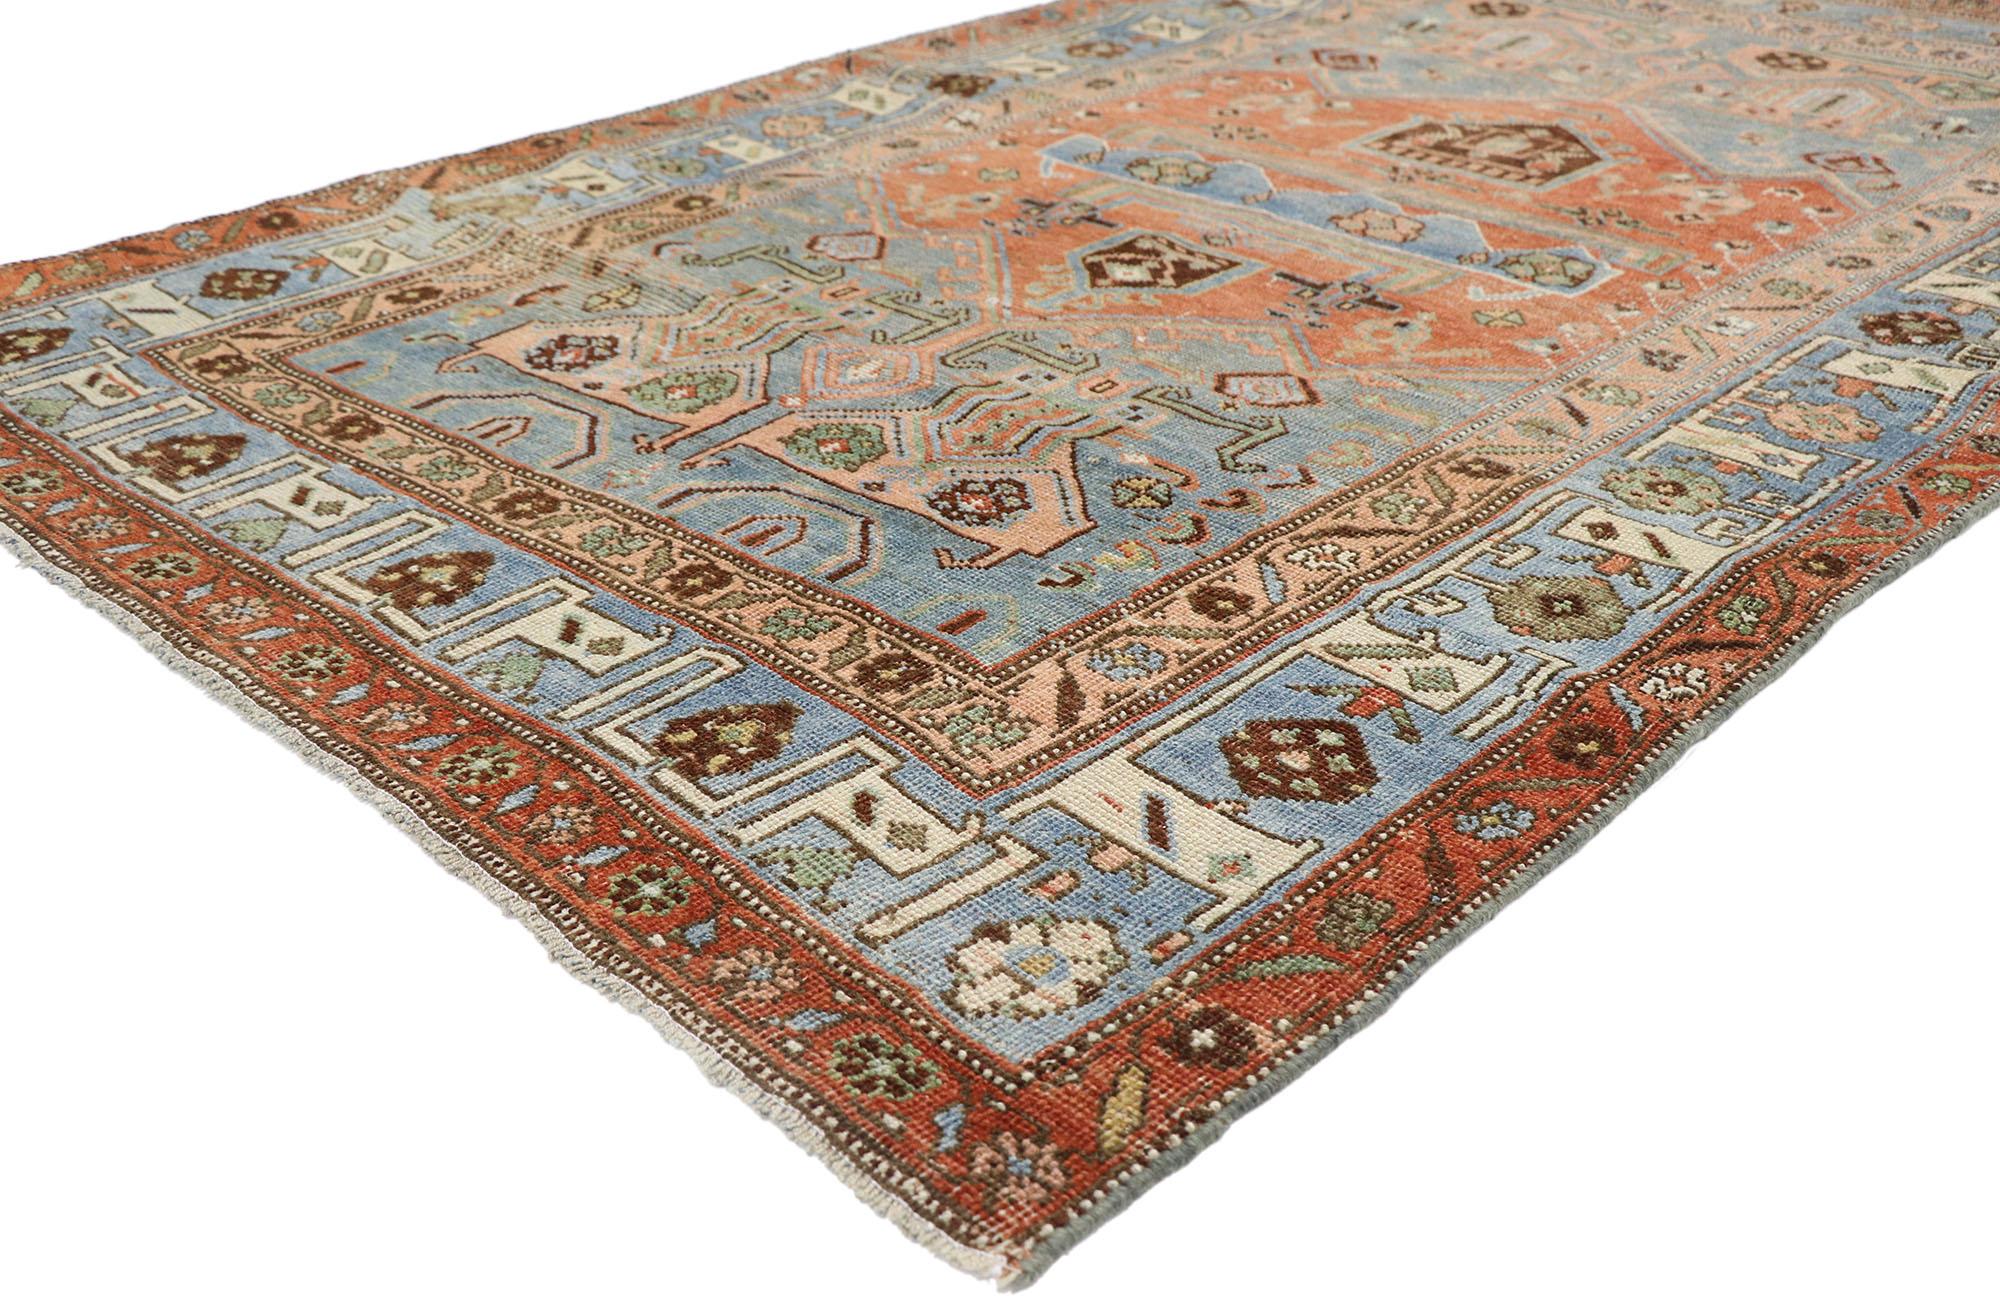 60925, antique Persian Bijar rug with Modern Rustic Tribal style. Balancing traditional sensibility and tribal design elements with nostalgic charm, this hand knotted wool antique Persian Bijar rug can beautifully blend modern, traditional, rustic,